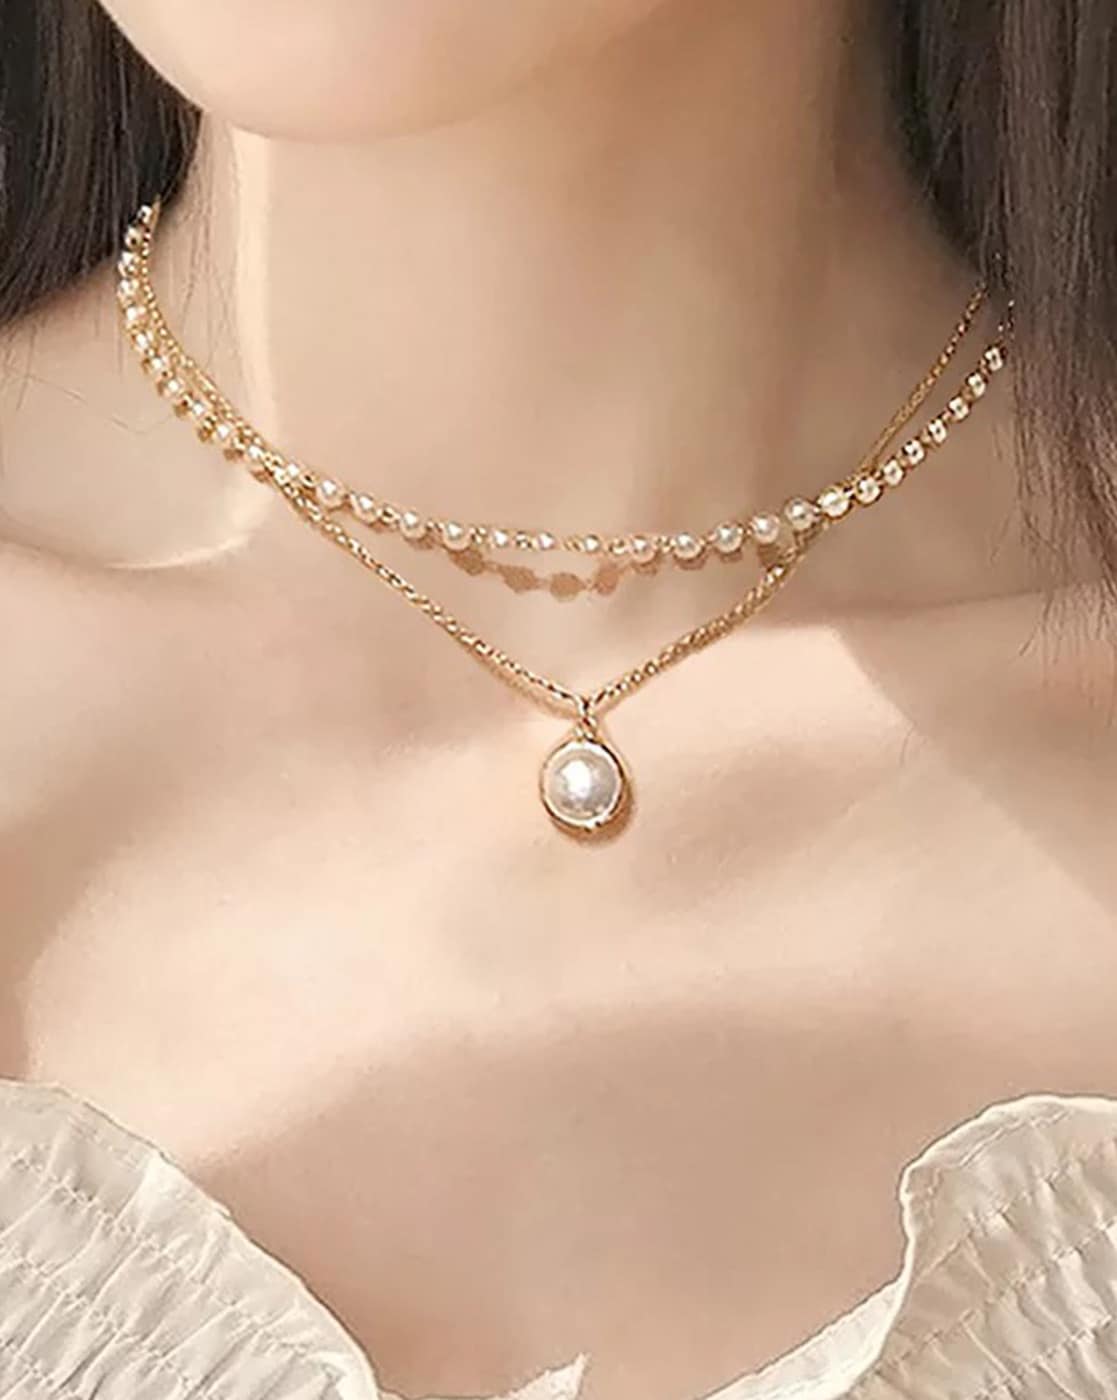 Buy Single Pearl Necklace Gold, Simple Real Pearl Necklace for Bridesmaids  Rose Gold, Sterling Silver, Dainty Small Solitaire Wedding Jewelry Online  in India - Etsy